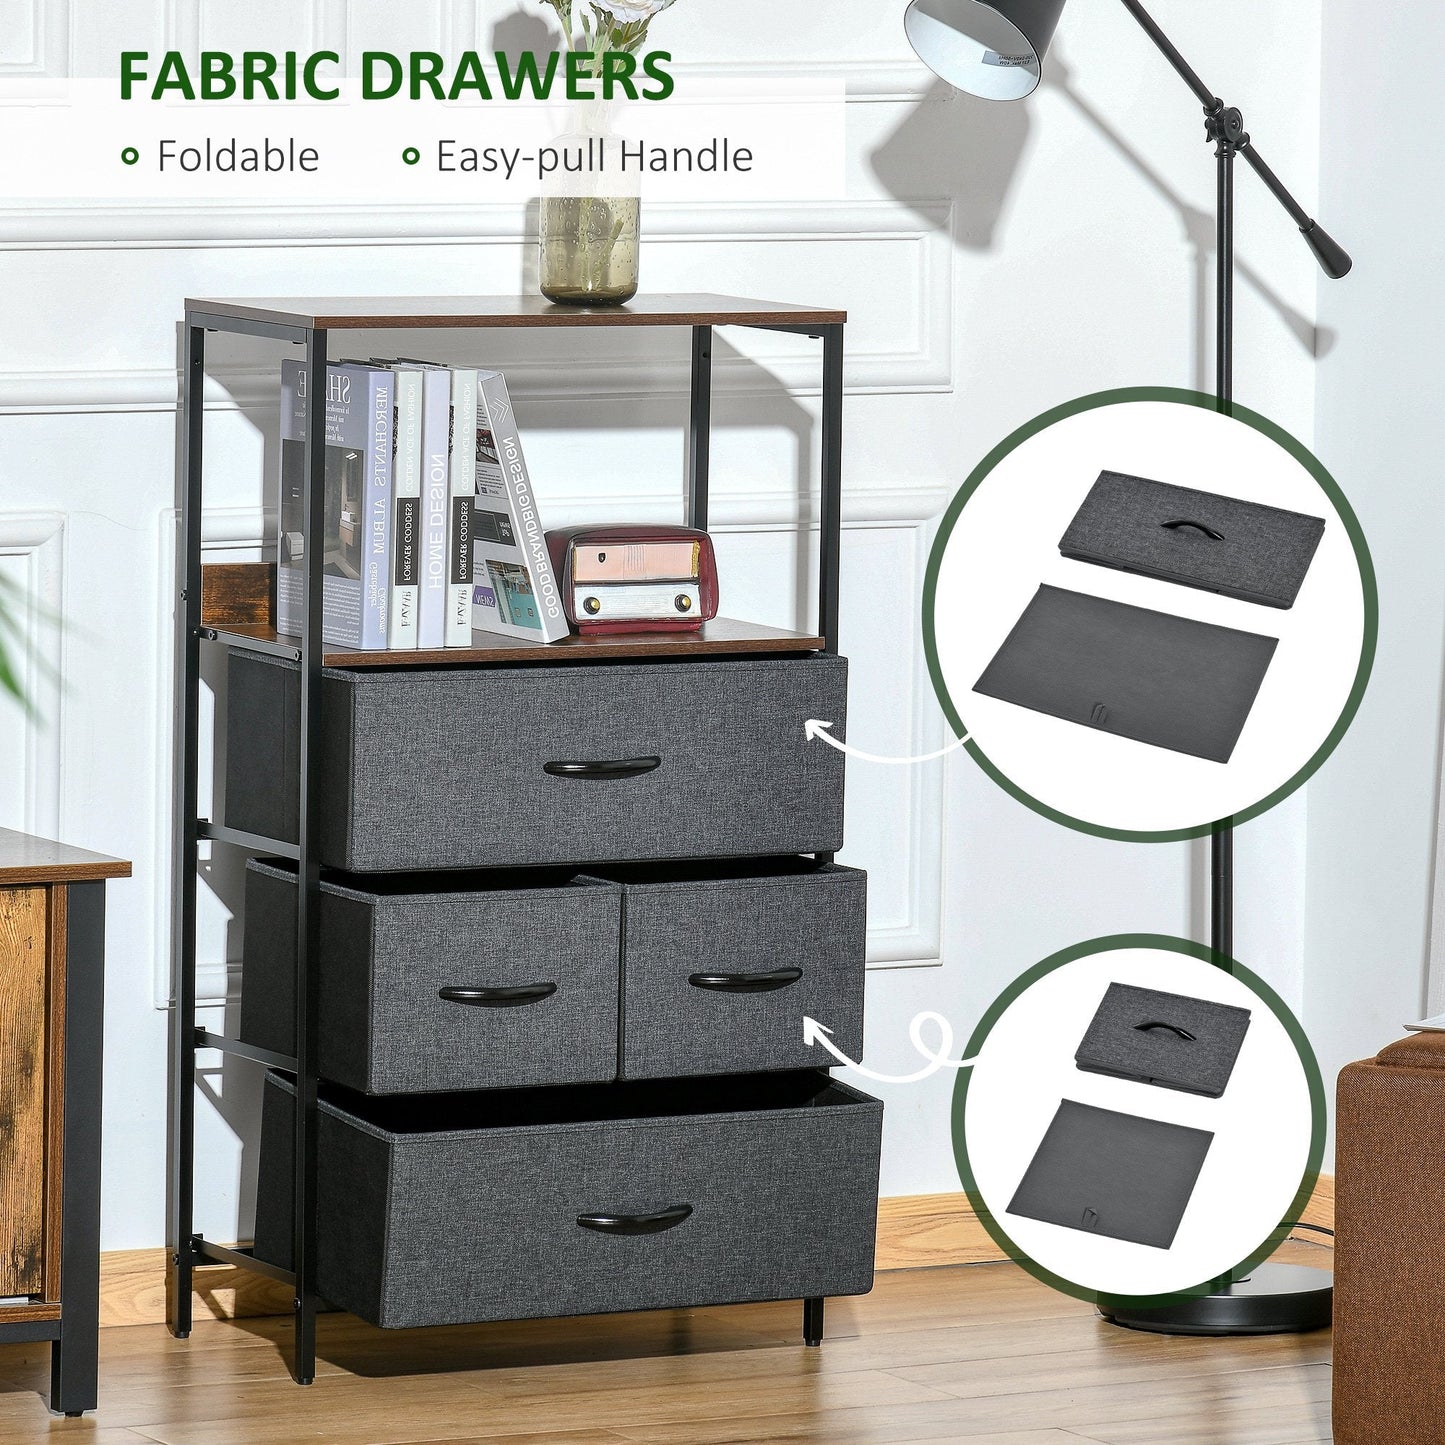 4 Drawer Storage Chest Unit with Shelves and Fabric Drawers - Black